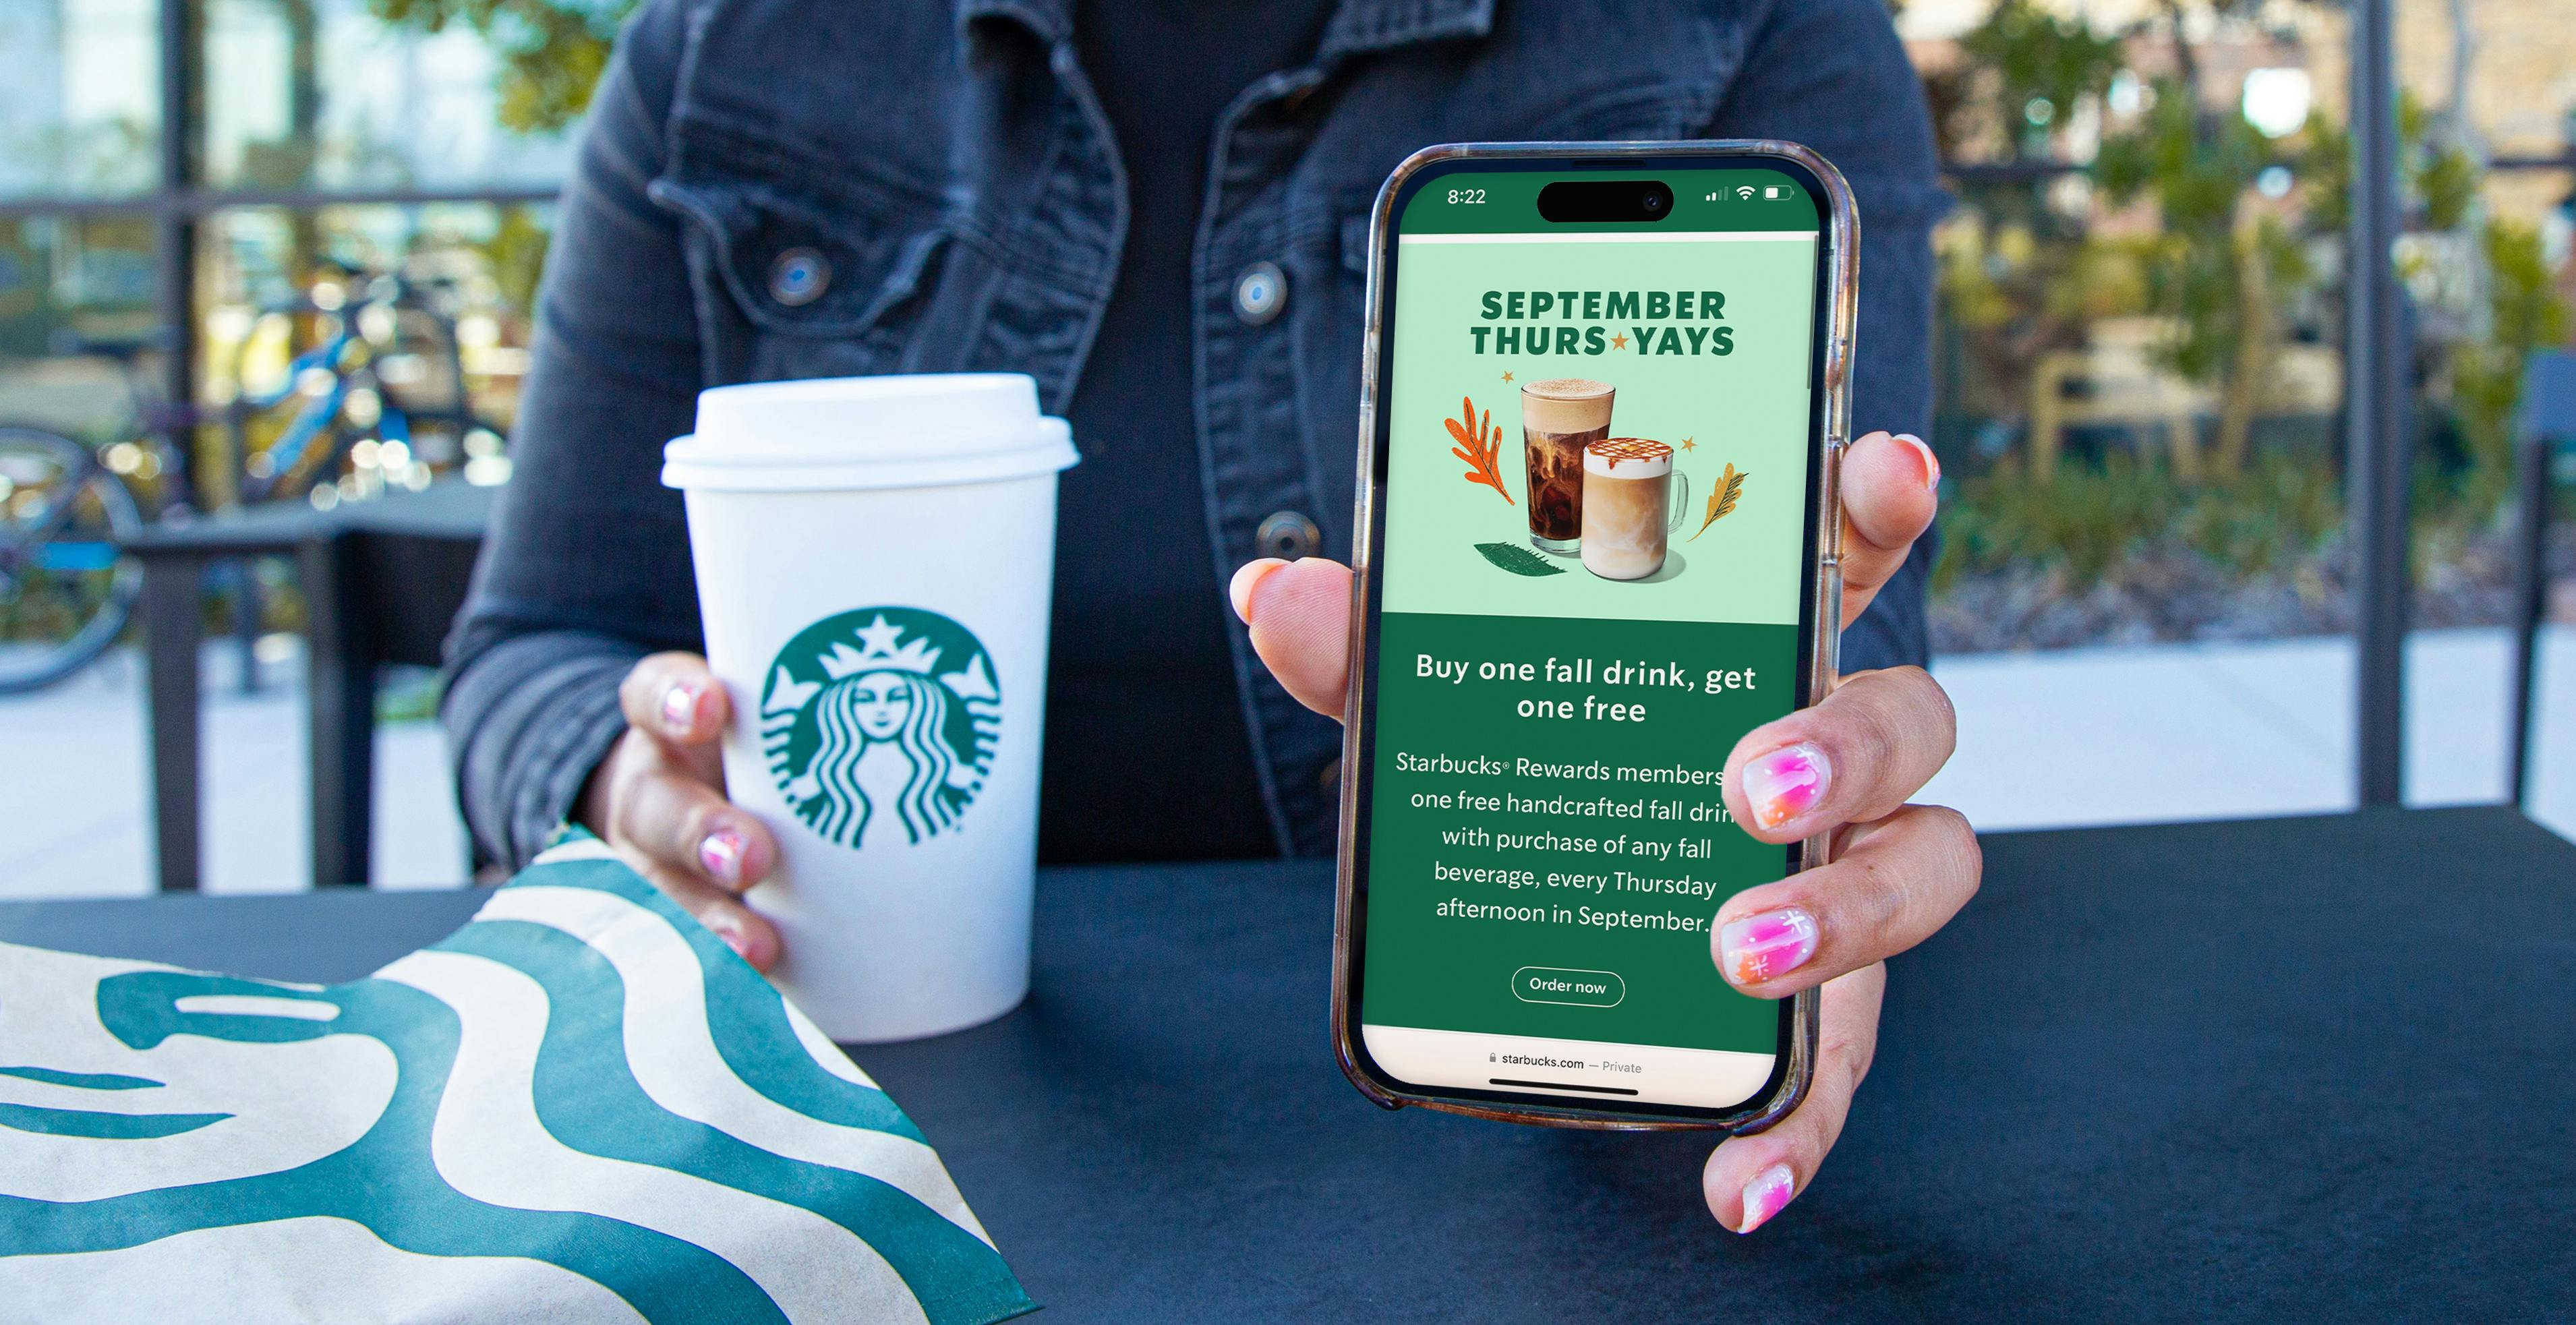 What You Should Know About the Starbucks BOGO Drinks Promotion The